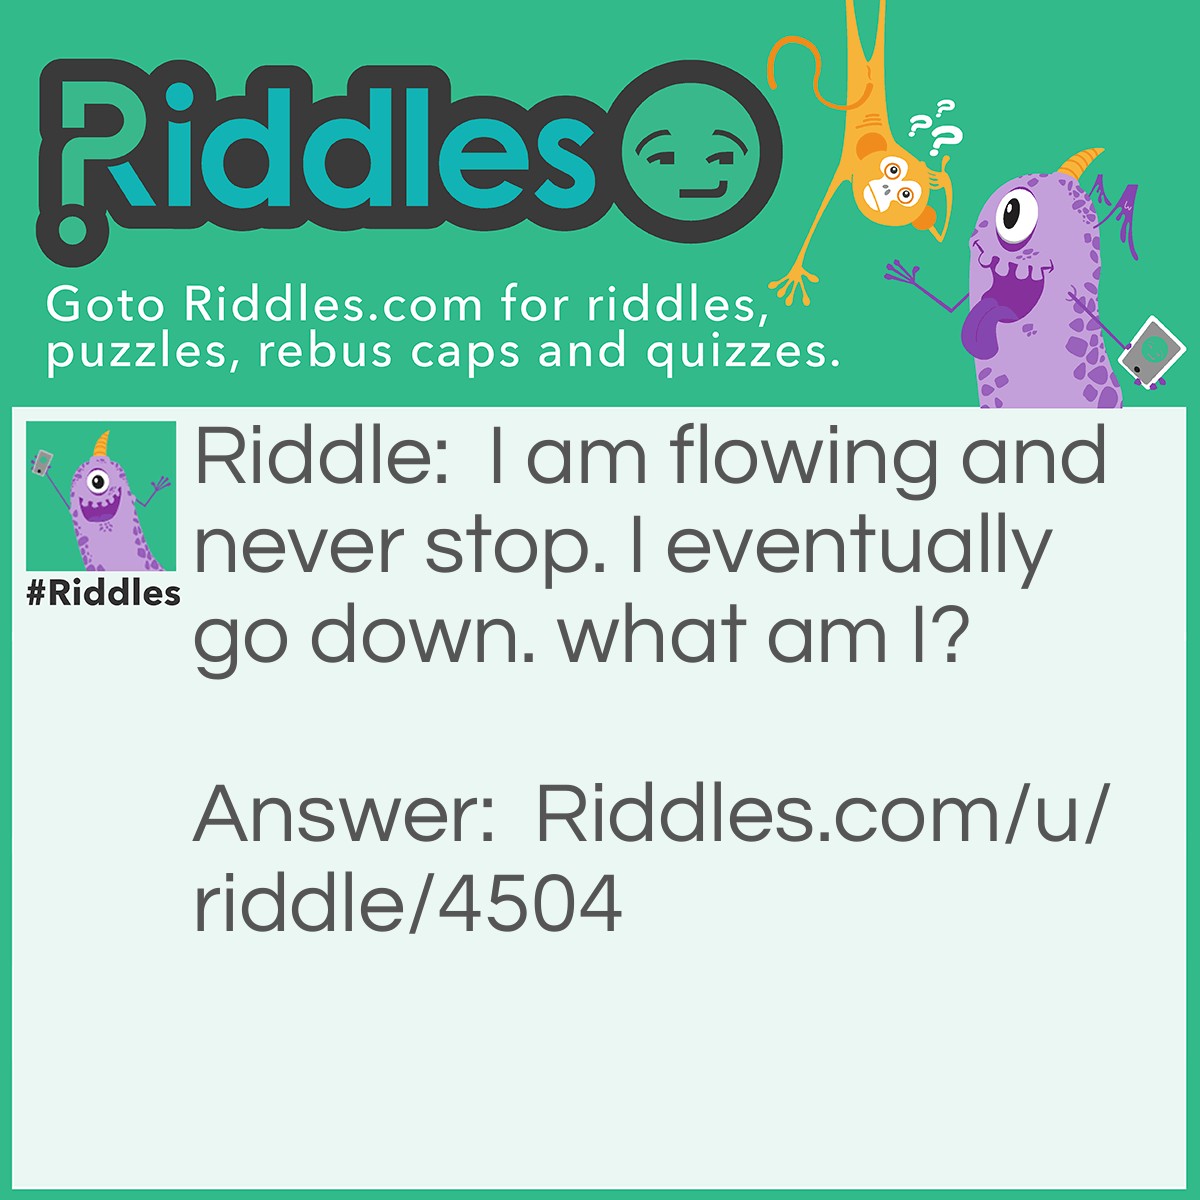 Riddle: I am flowing and never stop. I eventually go down. what am I? Answer: A river.